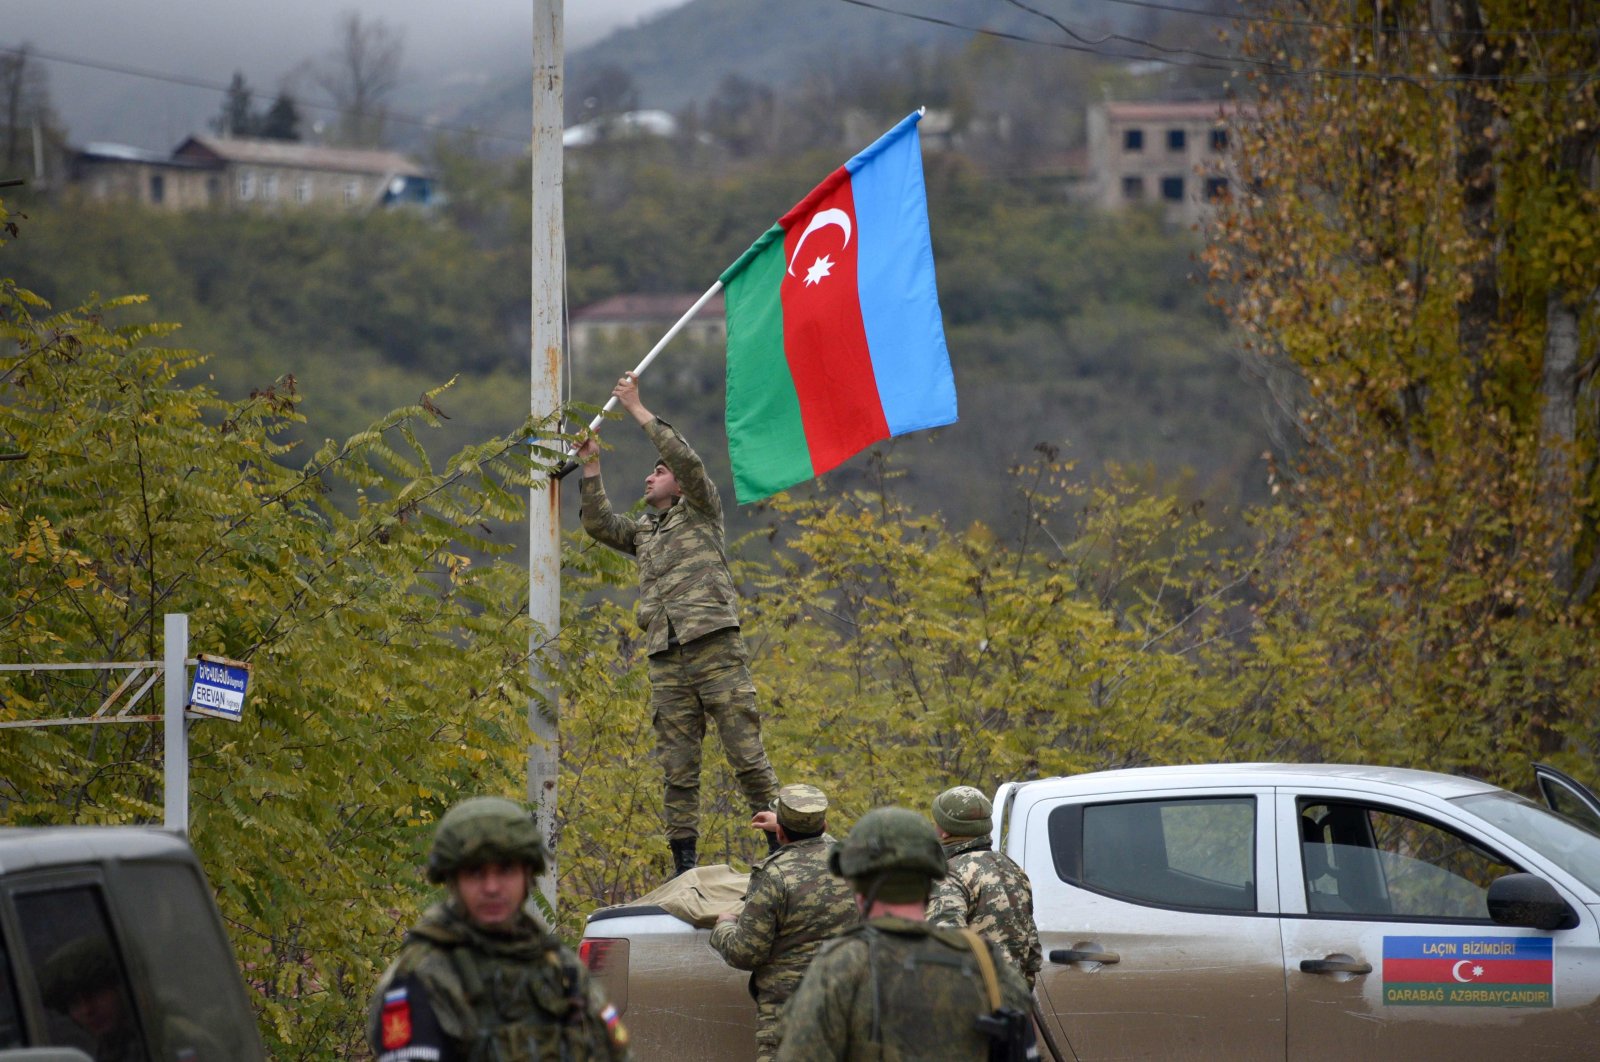 An Azerbaijani soldier fixes a national flag on a lamppost in the town of Lachin, Azerbaijan, Dec. 1, 2020. (AFP Photo)